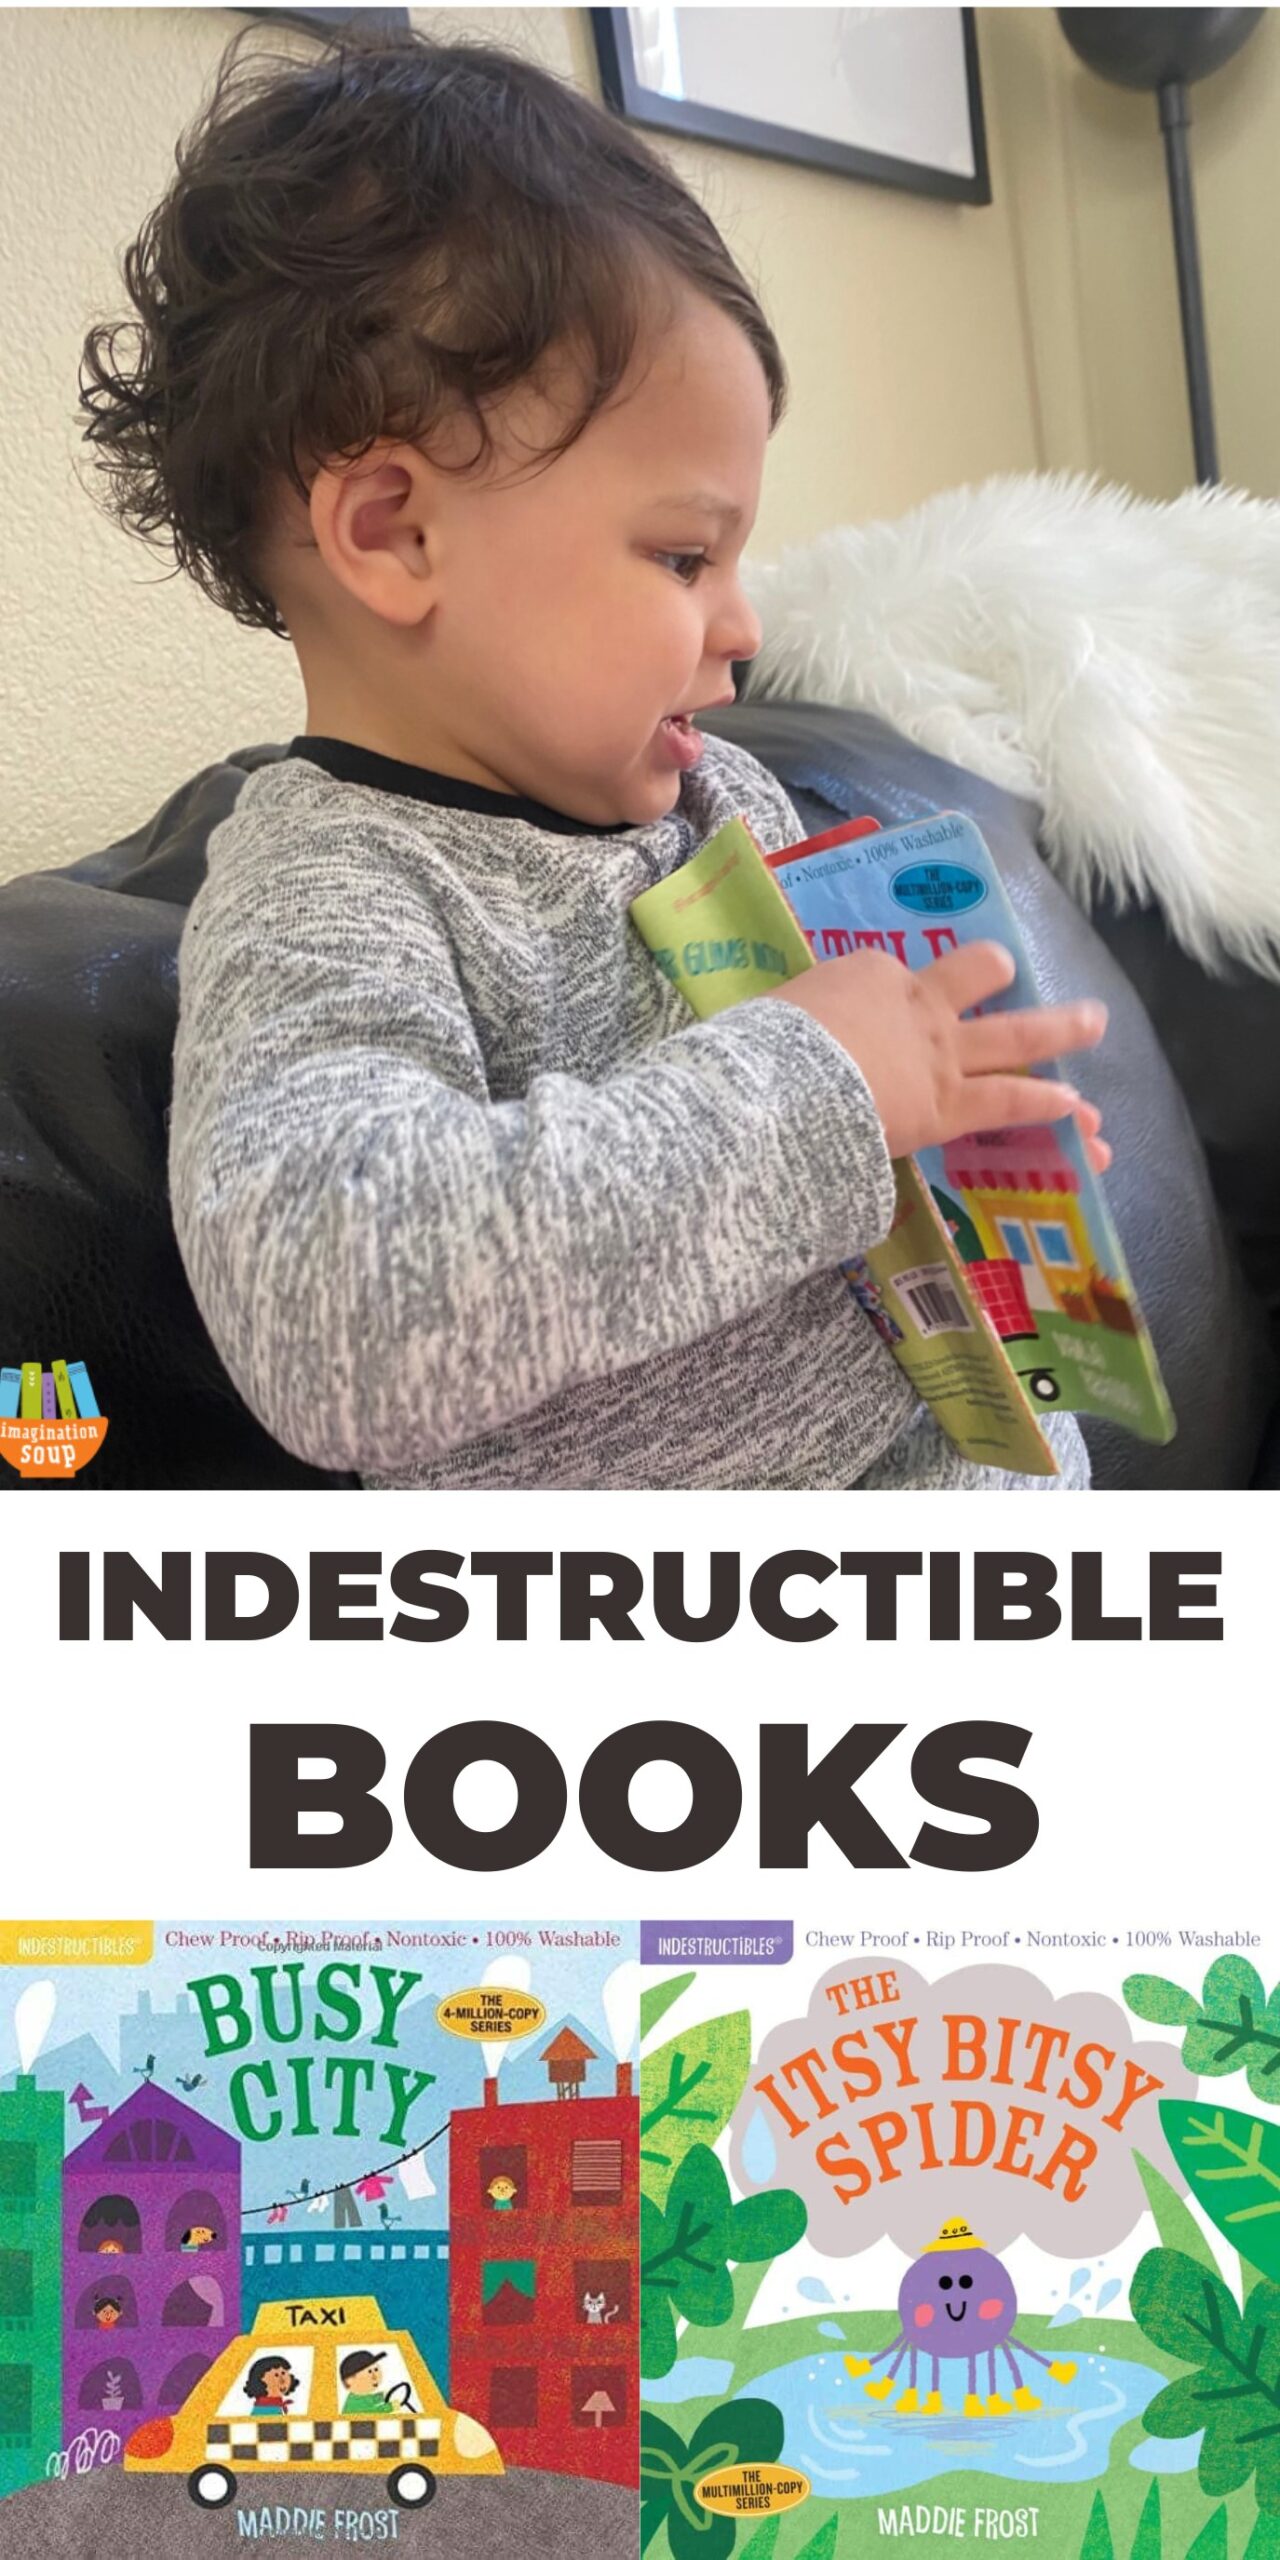 If you're looking for a chew-proof, rip-proof, and drool-proof baby book that you can carry with you EVERYWHERE, then you need Indestructibles books from Workman Publishing.